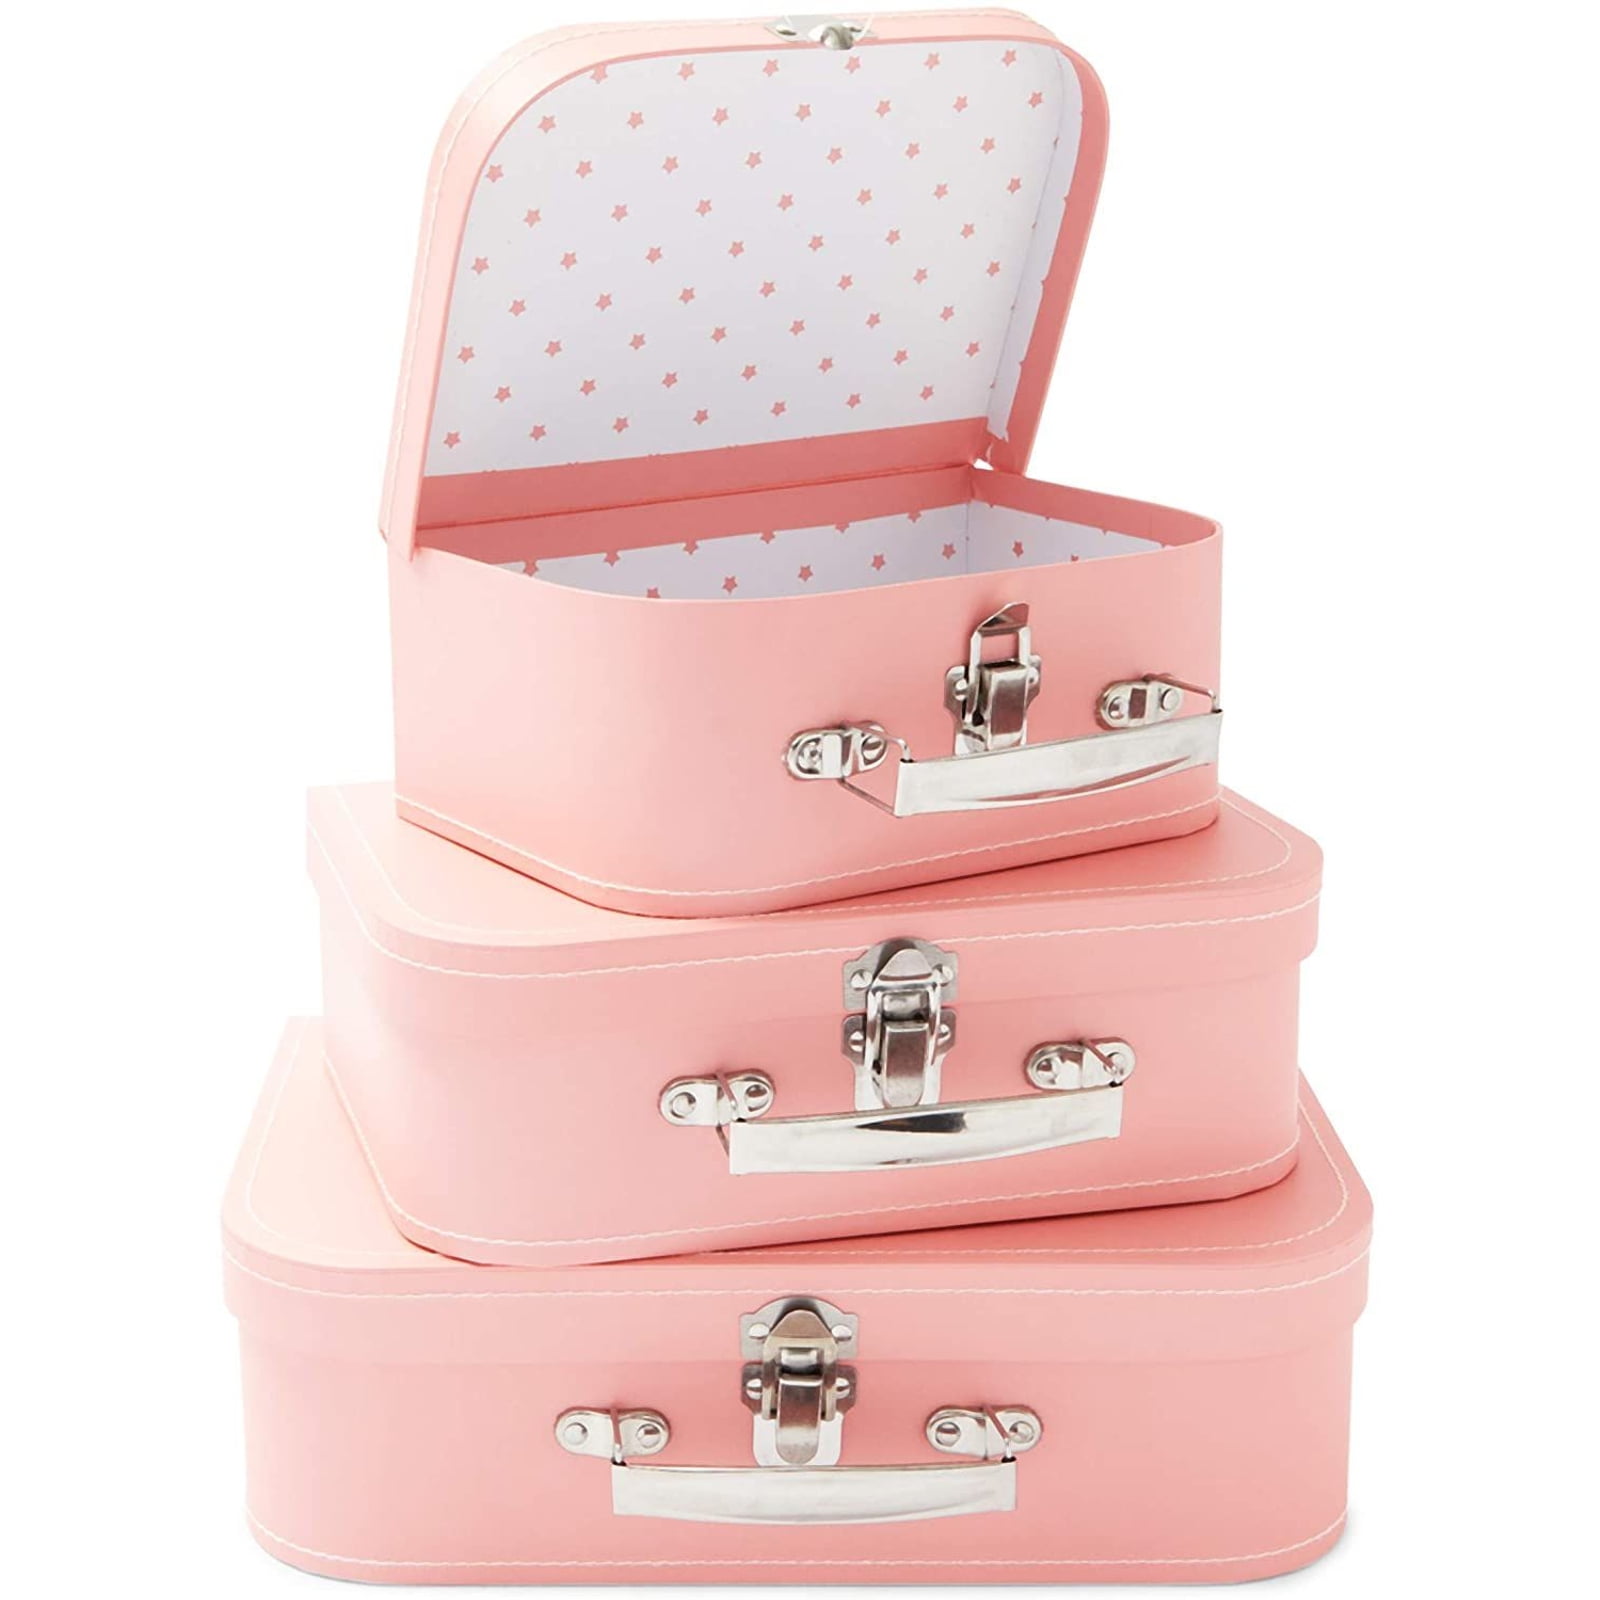 Mini Organizer Box Storage Container Case, Desktop Drawer Units, Pink, Art  Craft Organizers and Storage, Vanity in Home Or Office Durable Plastic  Container for Office Supplies Jewelry Desk Objects 